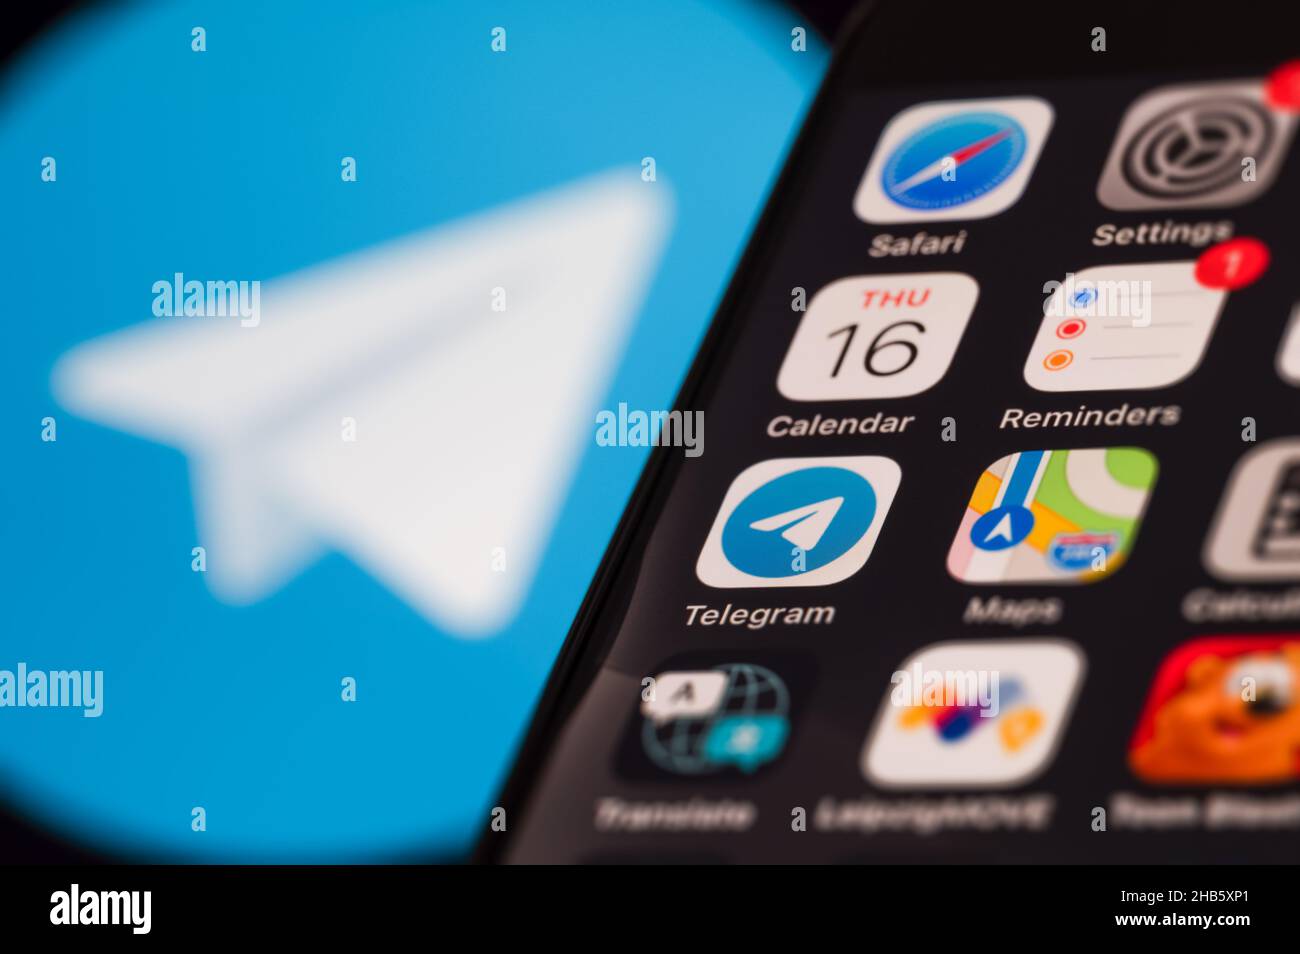 Smartphone screen displaying various application icons. In the background a blurred Telegram logo. Stock Photo